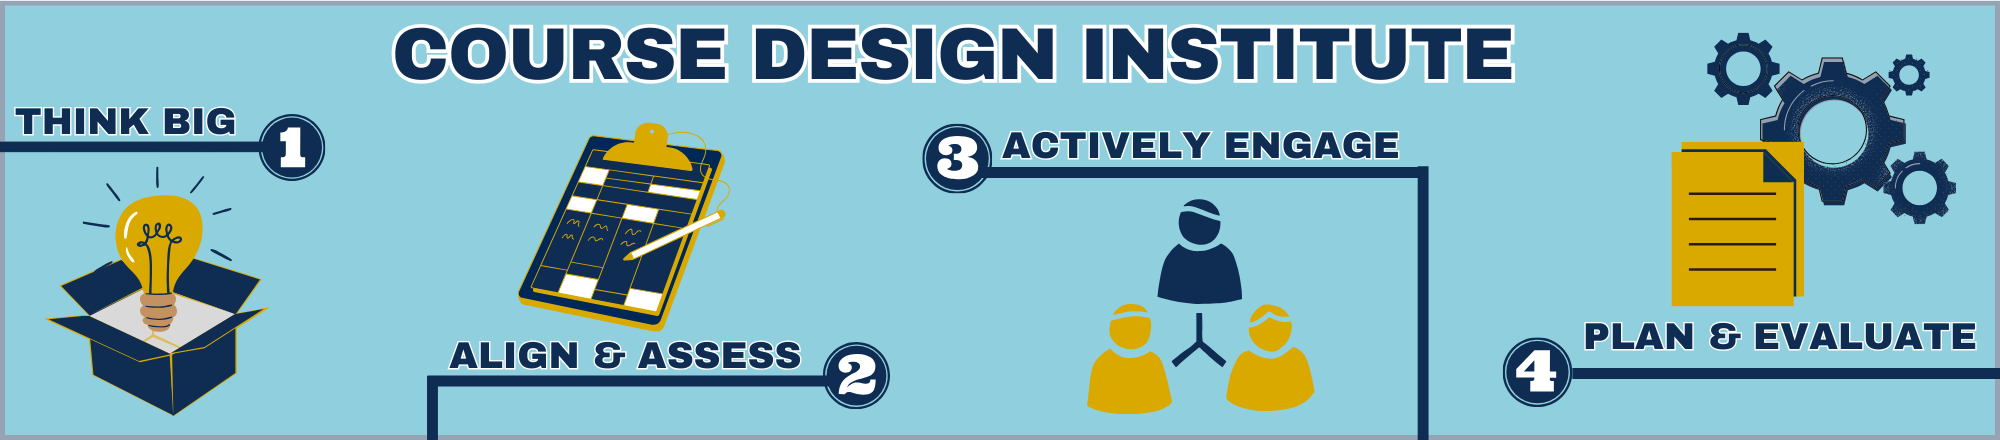 Course Design institute Banner: Think Big with, Align and Asses, Actively Engage, and Plan and Evaluate